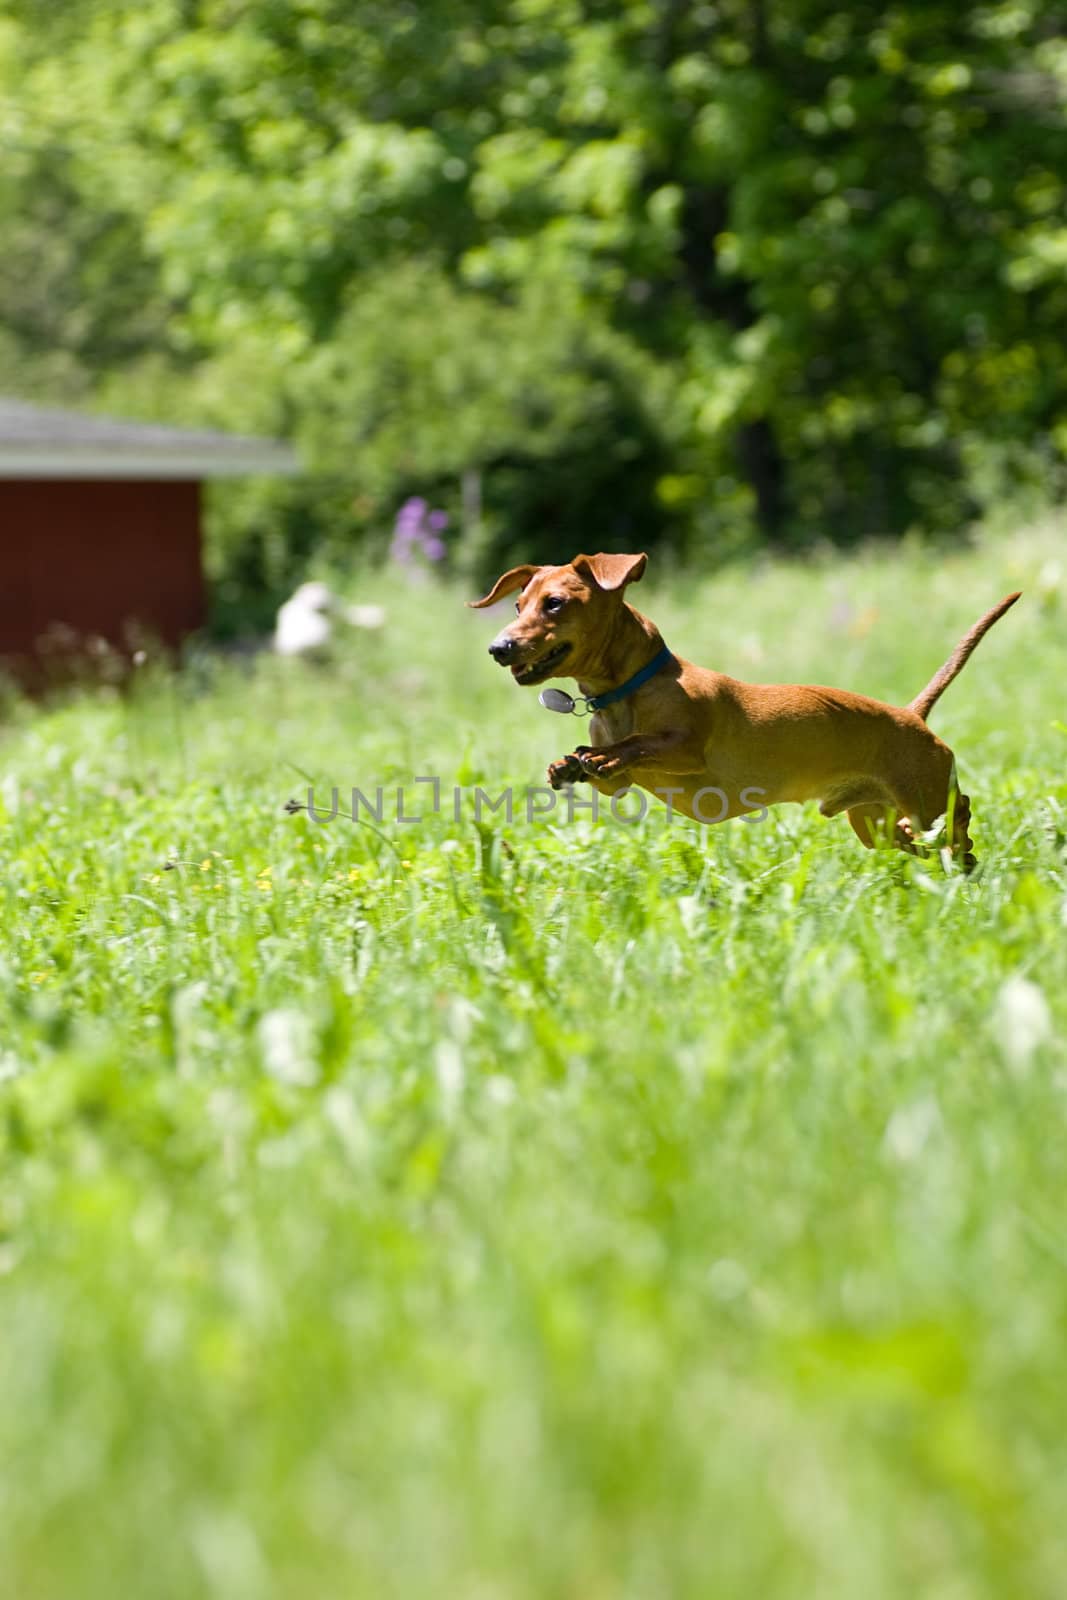 A miniature dachshund in mid stride, as he jumps through the tall grasses.